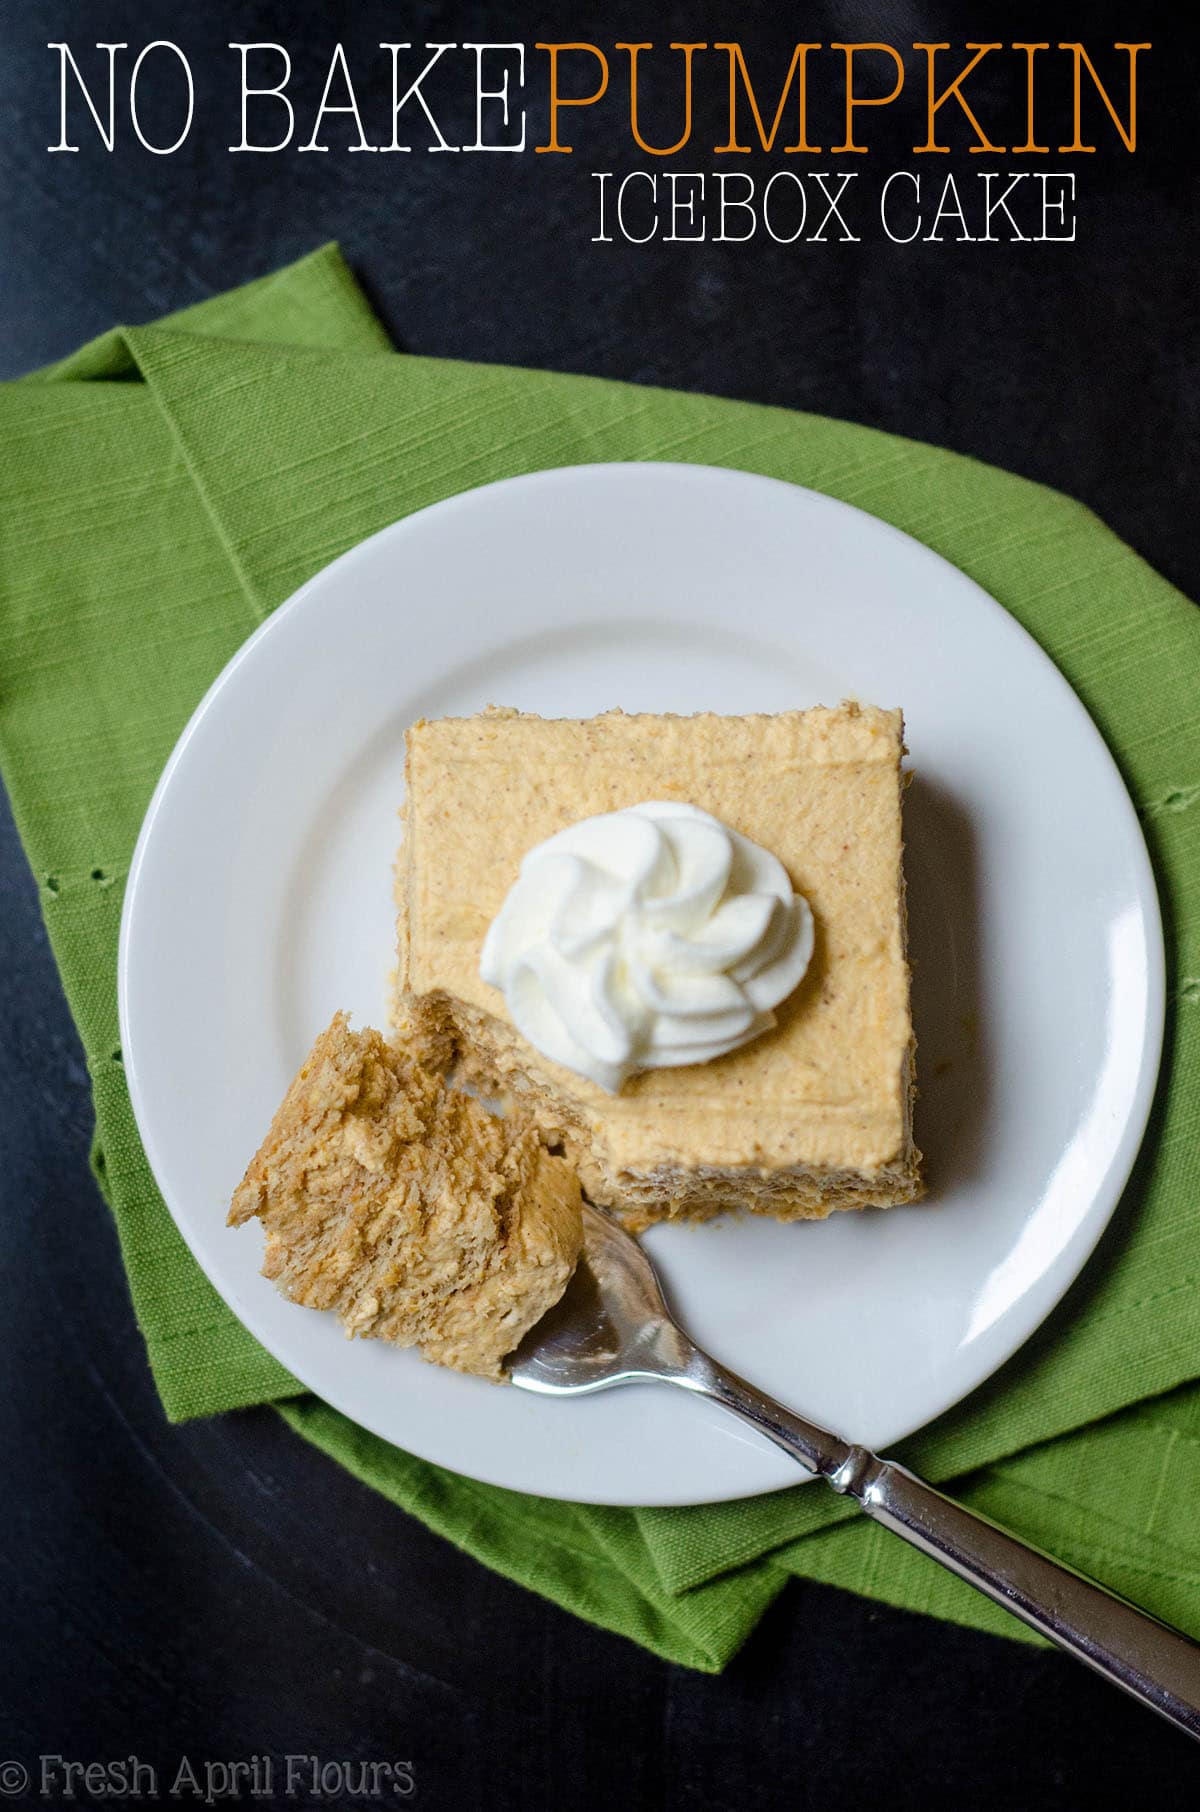 No Bake Pumpkin Icebox Cake: Layers of graham crackers filled with pumpkin whipped cream. An easy no bake treat for your favorite fall gatherings!  via @frshaprilflours